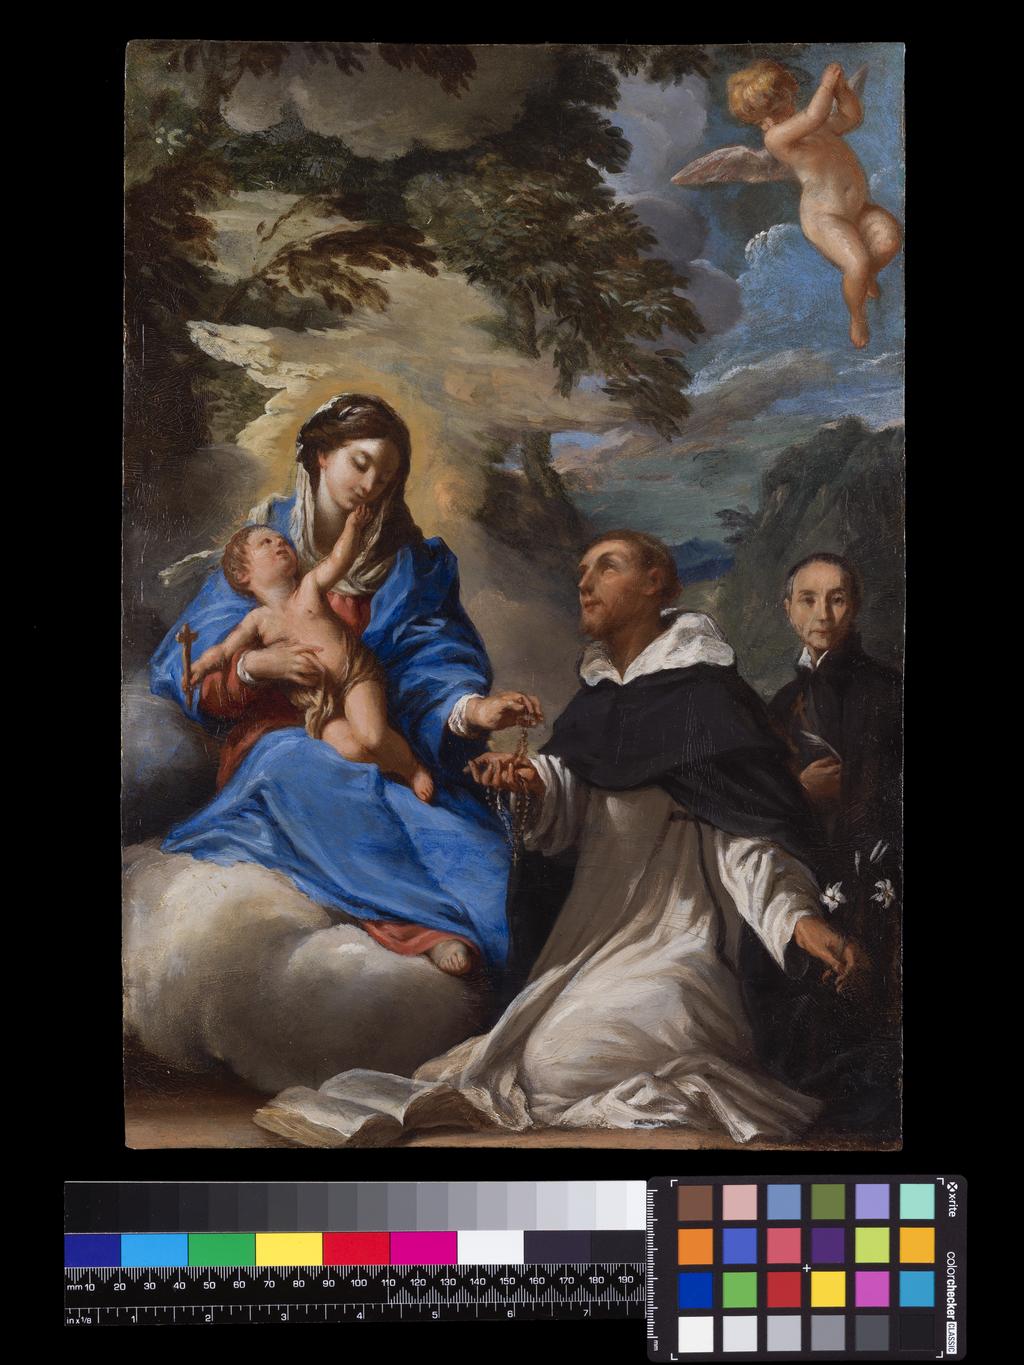 An image of St Dominic receiving the Rosary from the Virgin Mary. Unknown painter, Roman School. Oil on copper, height 37.5 cm, width, 26.6 cm, 1674-1755. Production Note: perhaps Pier Leone Ghezzi.